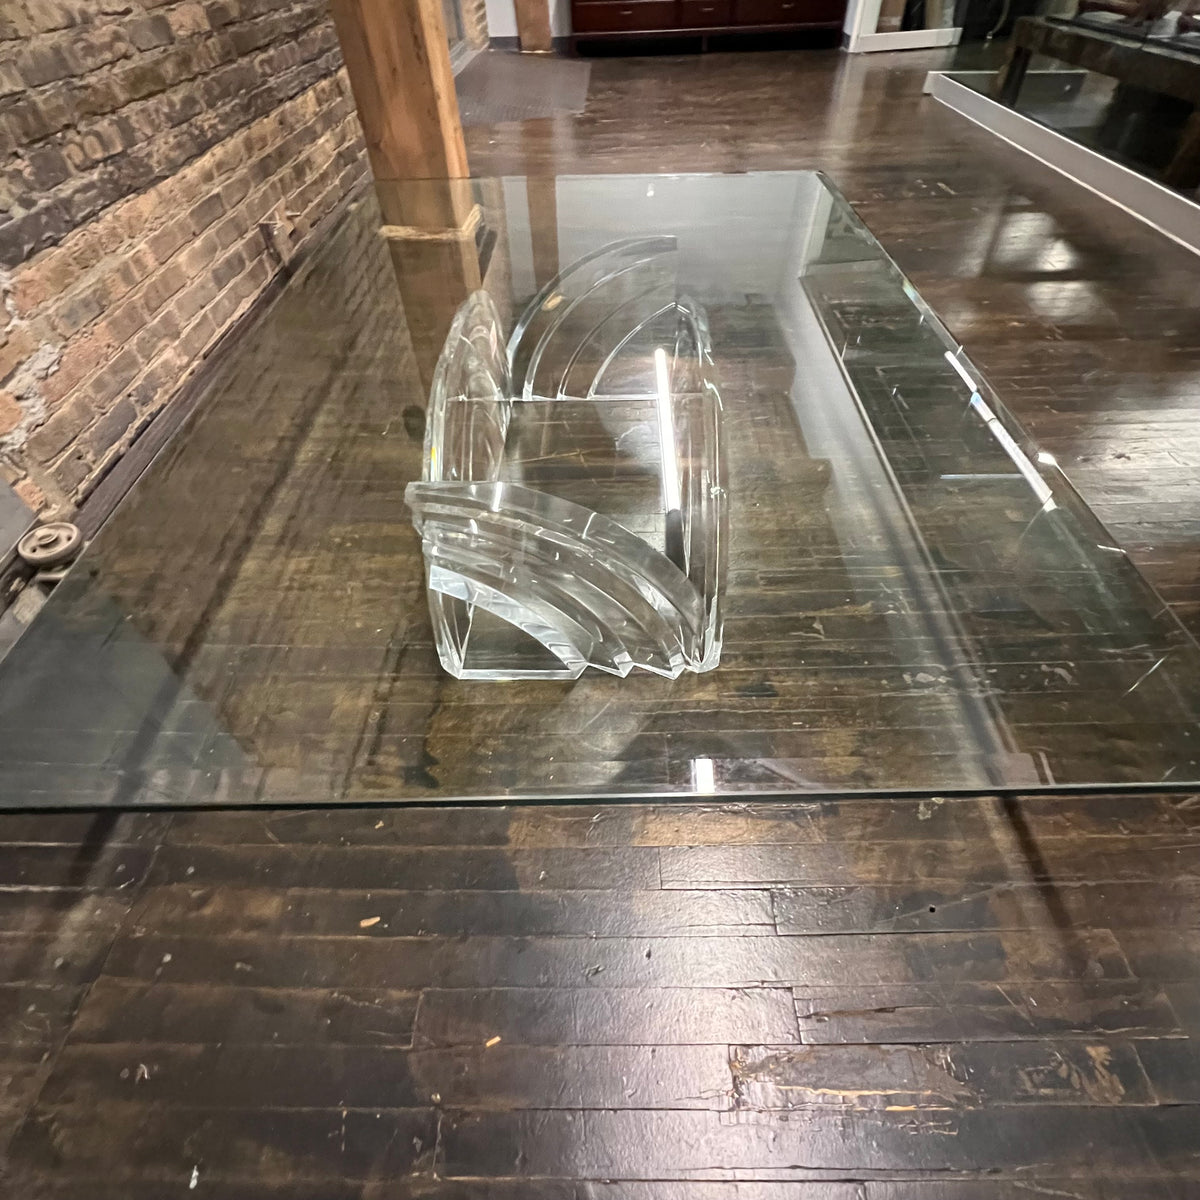 Lucite and glass coffee table, sculptural base, circa 1980s, Hollywood glam.